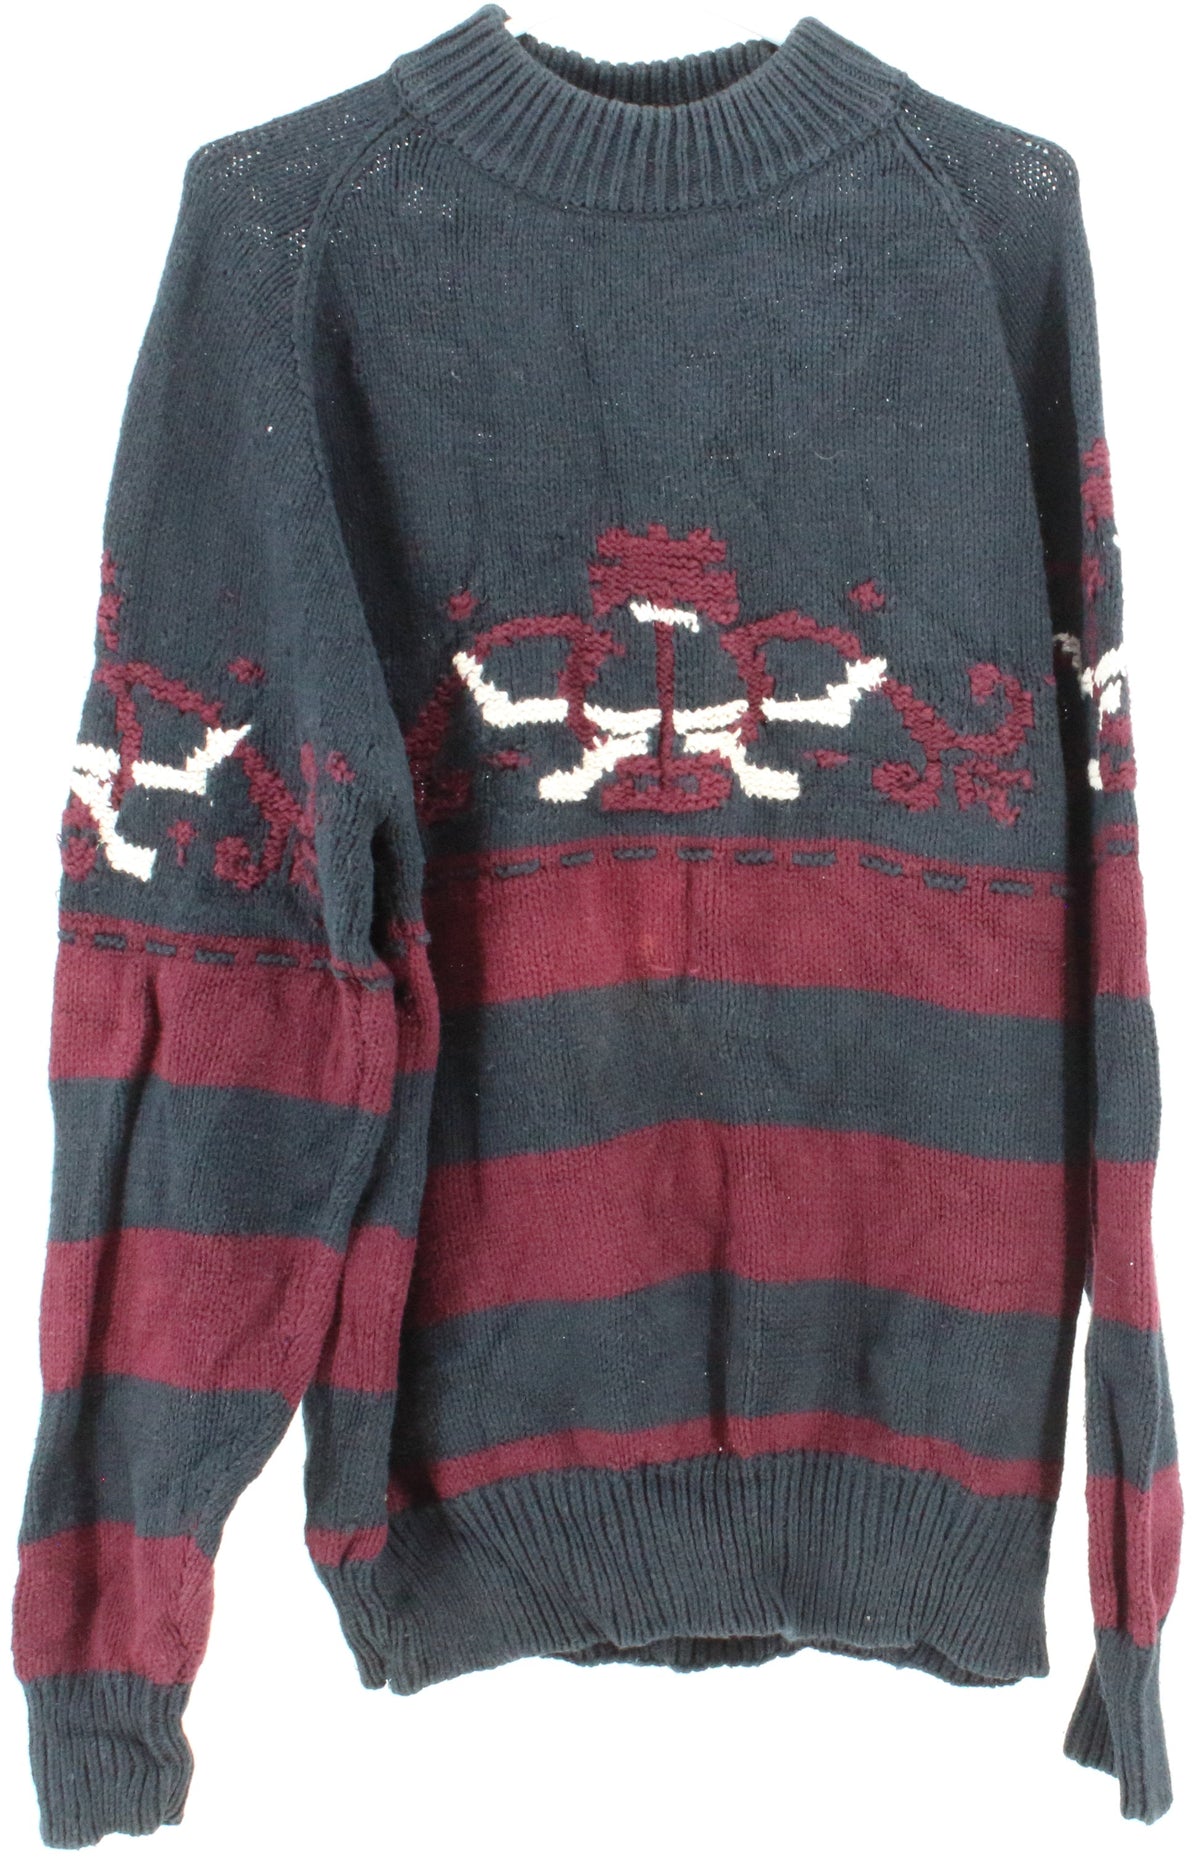 Cellini Collection Navy Blue and Burgundy Sweater